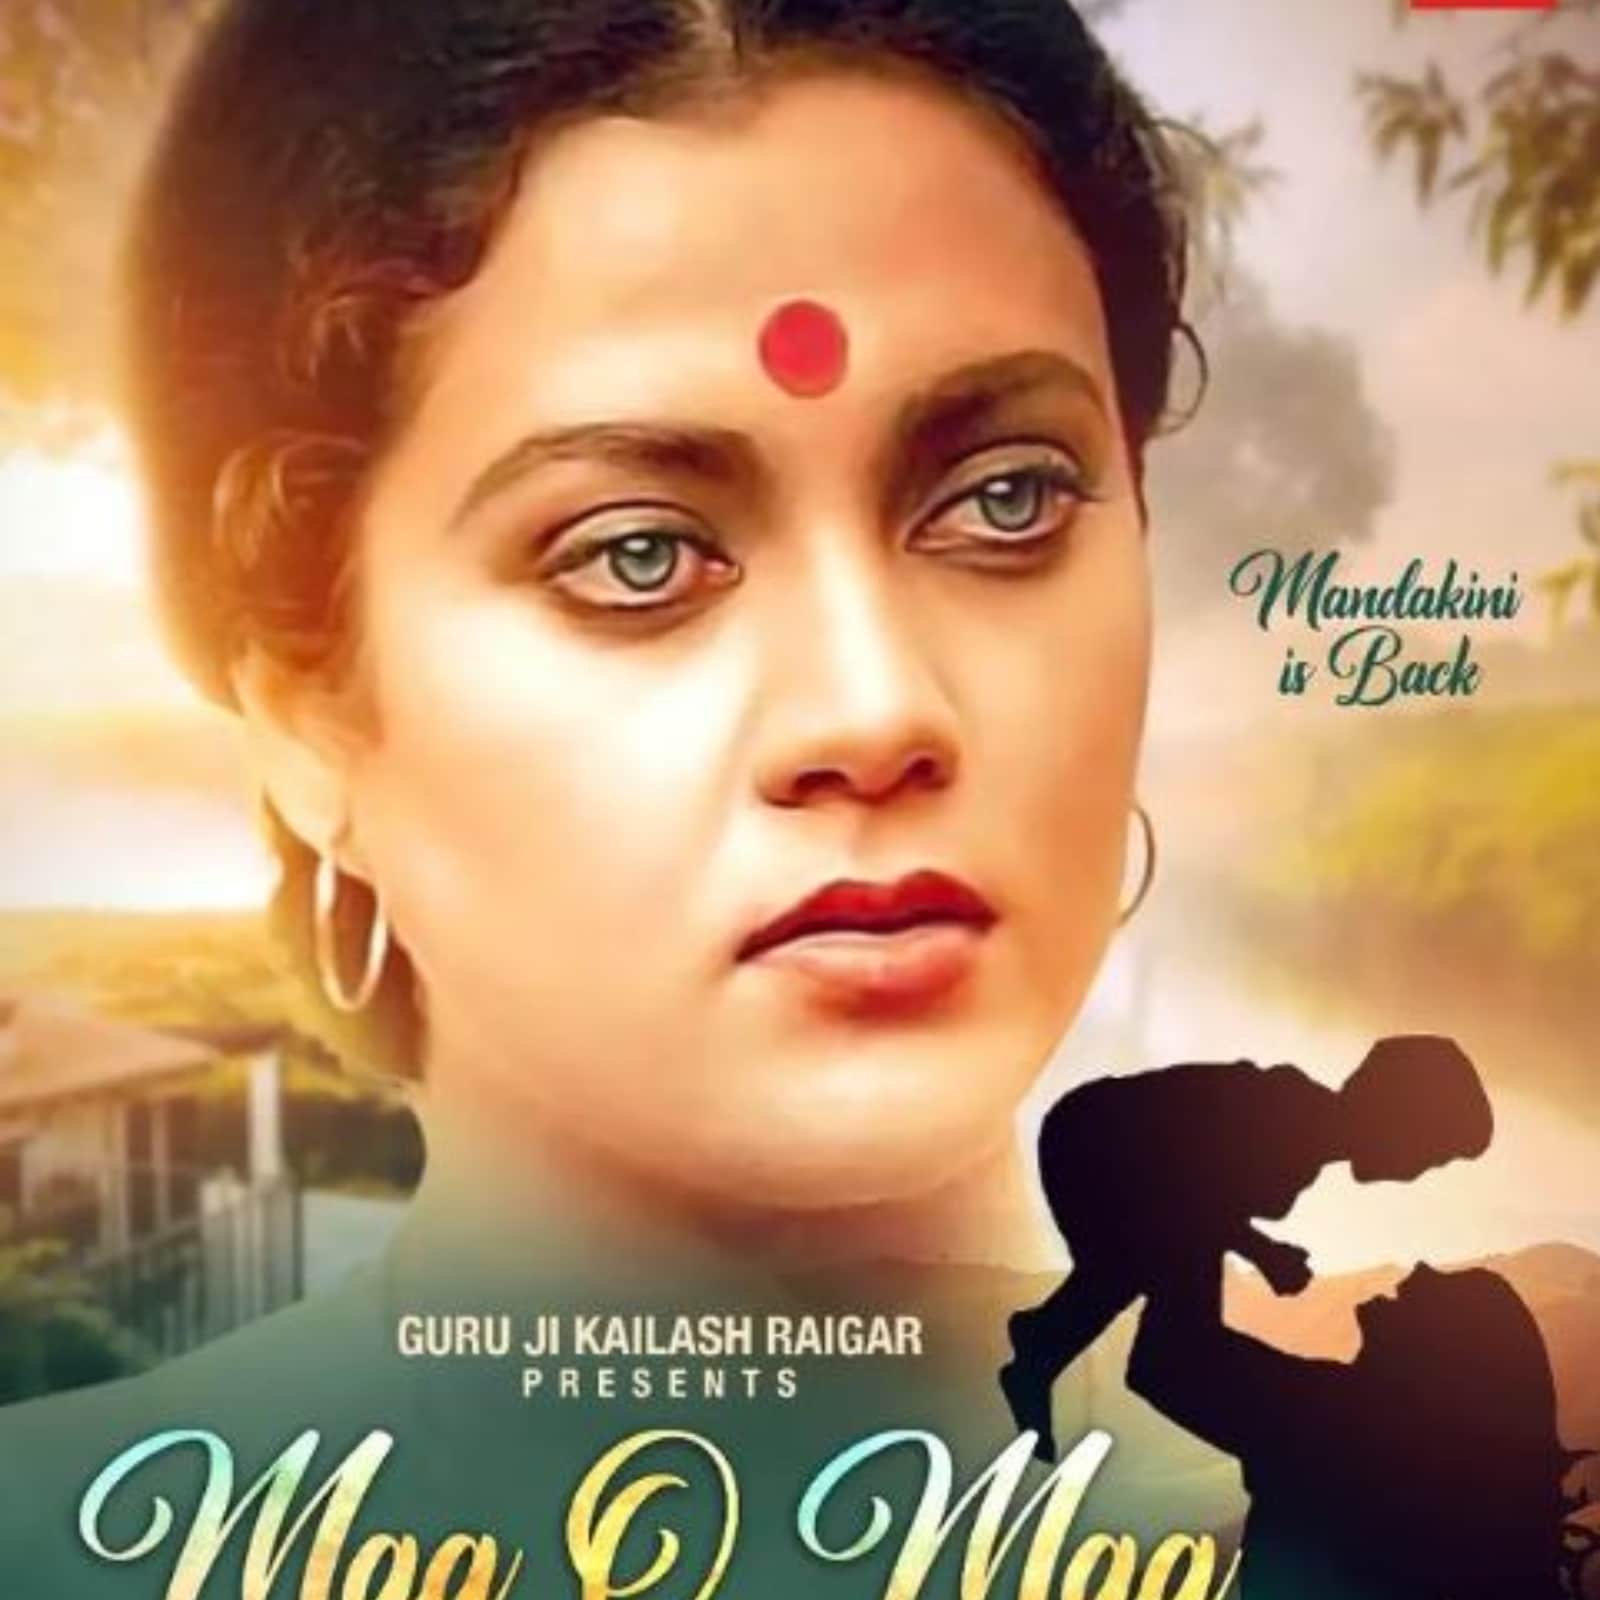 Ram Teri Ganga Maili Actress Mandakini to Make a Comeback After 26 Years  With Music Video Featuring Her Son